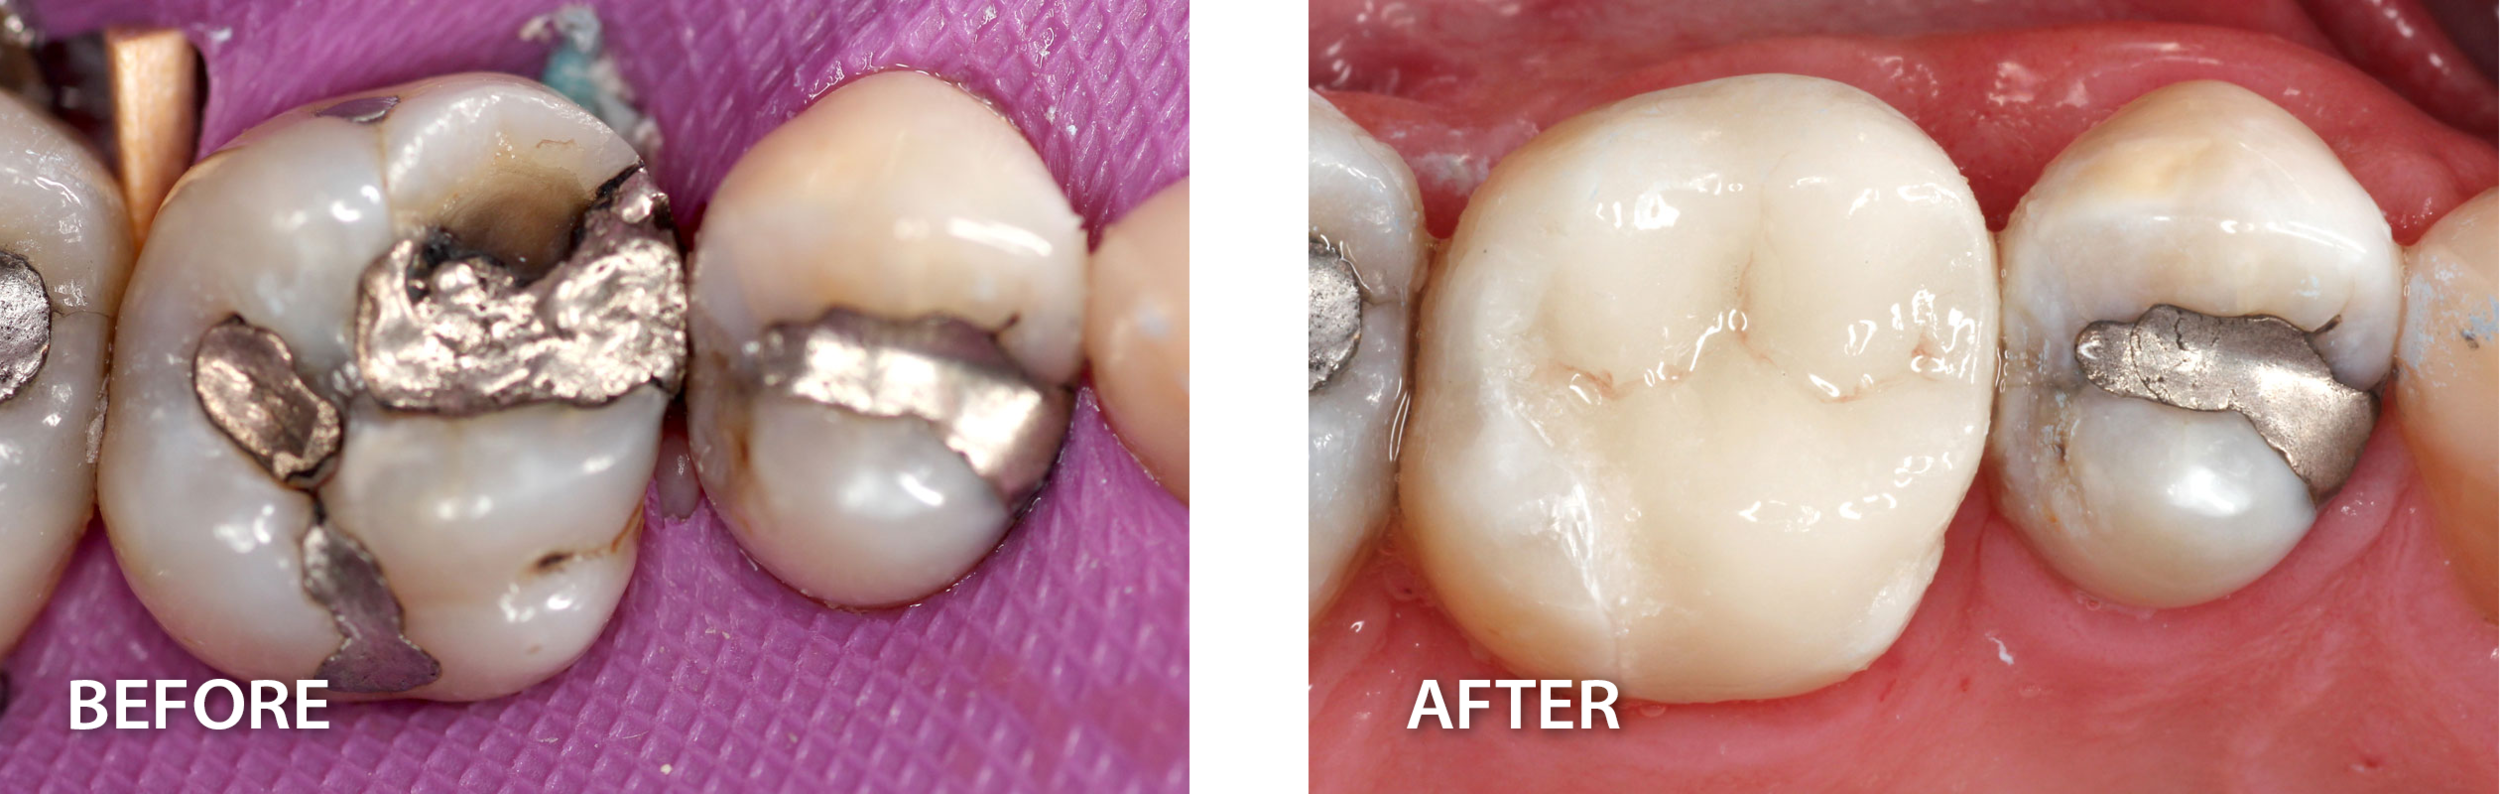  side by side images of teeth with silver fillings before direct adhesive dental procedure beside an after picture of a tooth without the silver fillings.  